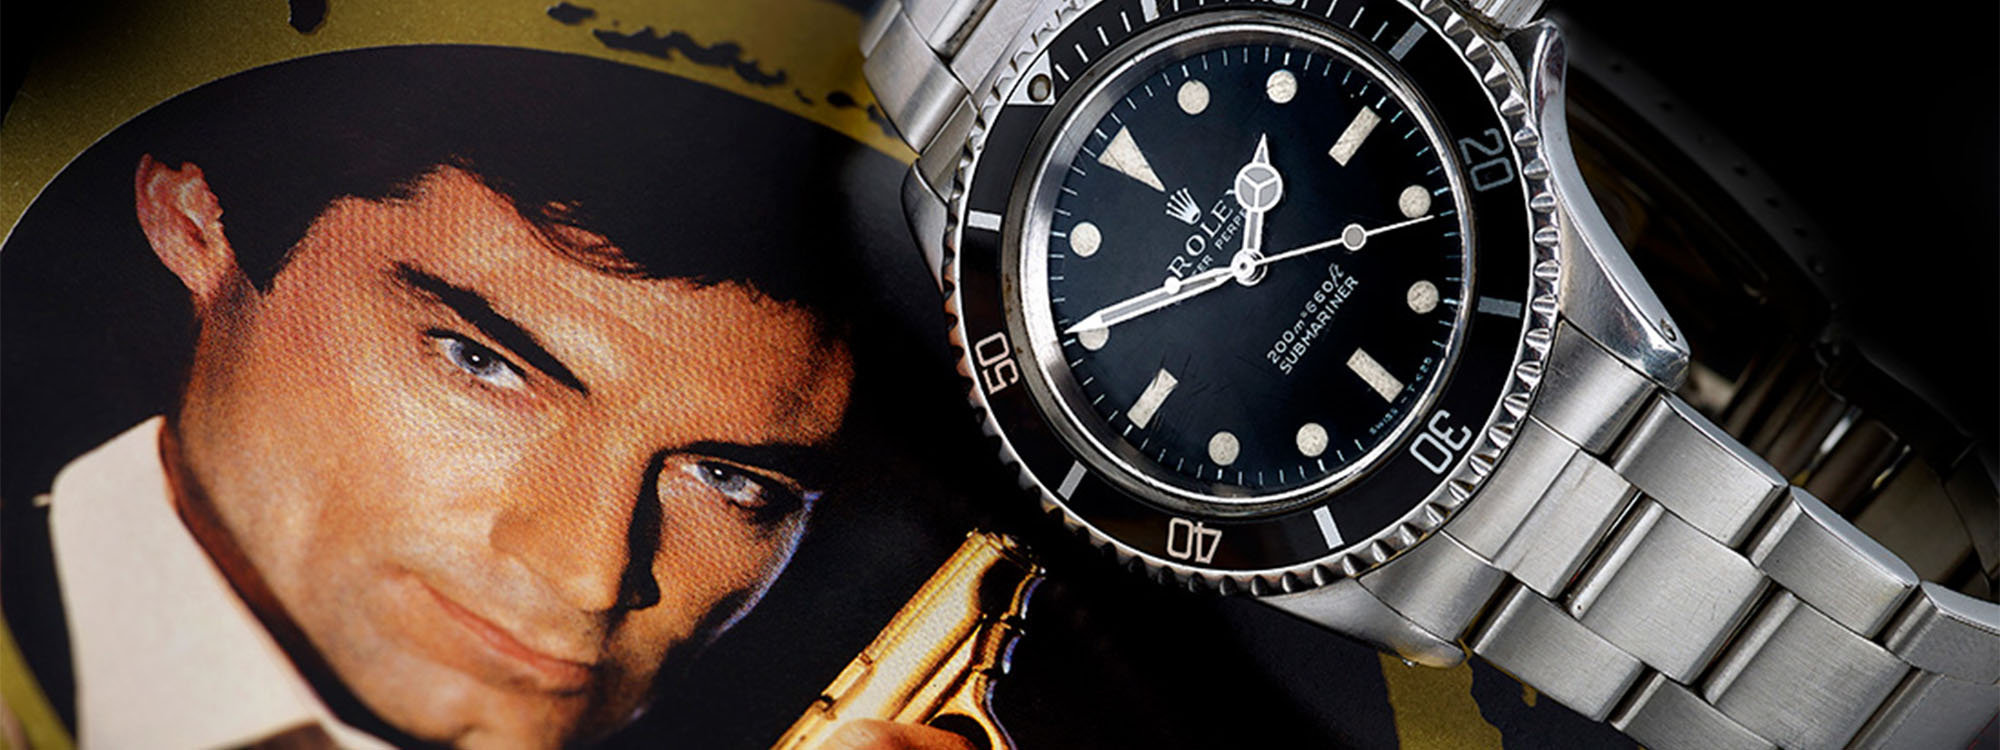 James Bond Watches: The Comprehensive Guide to 50 Years of 007's Timep |  Teddy Baldassarre